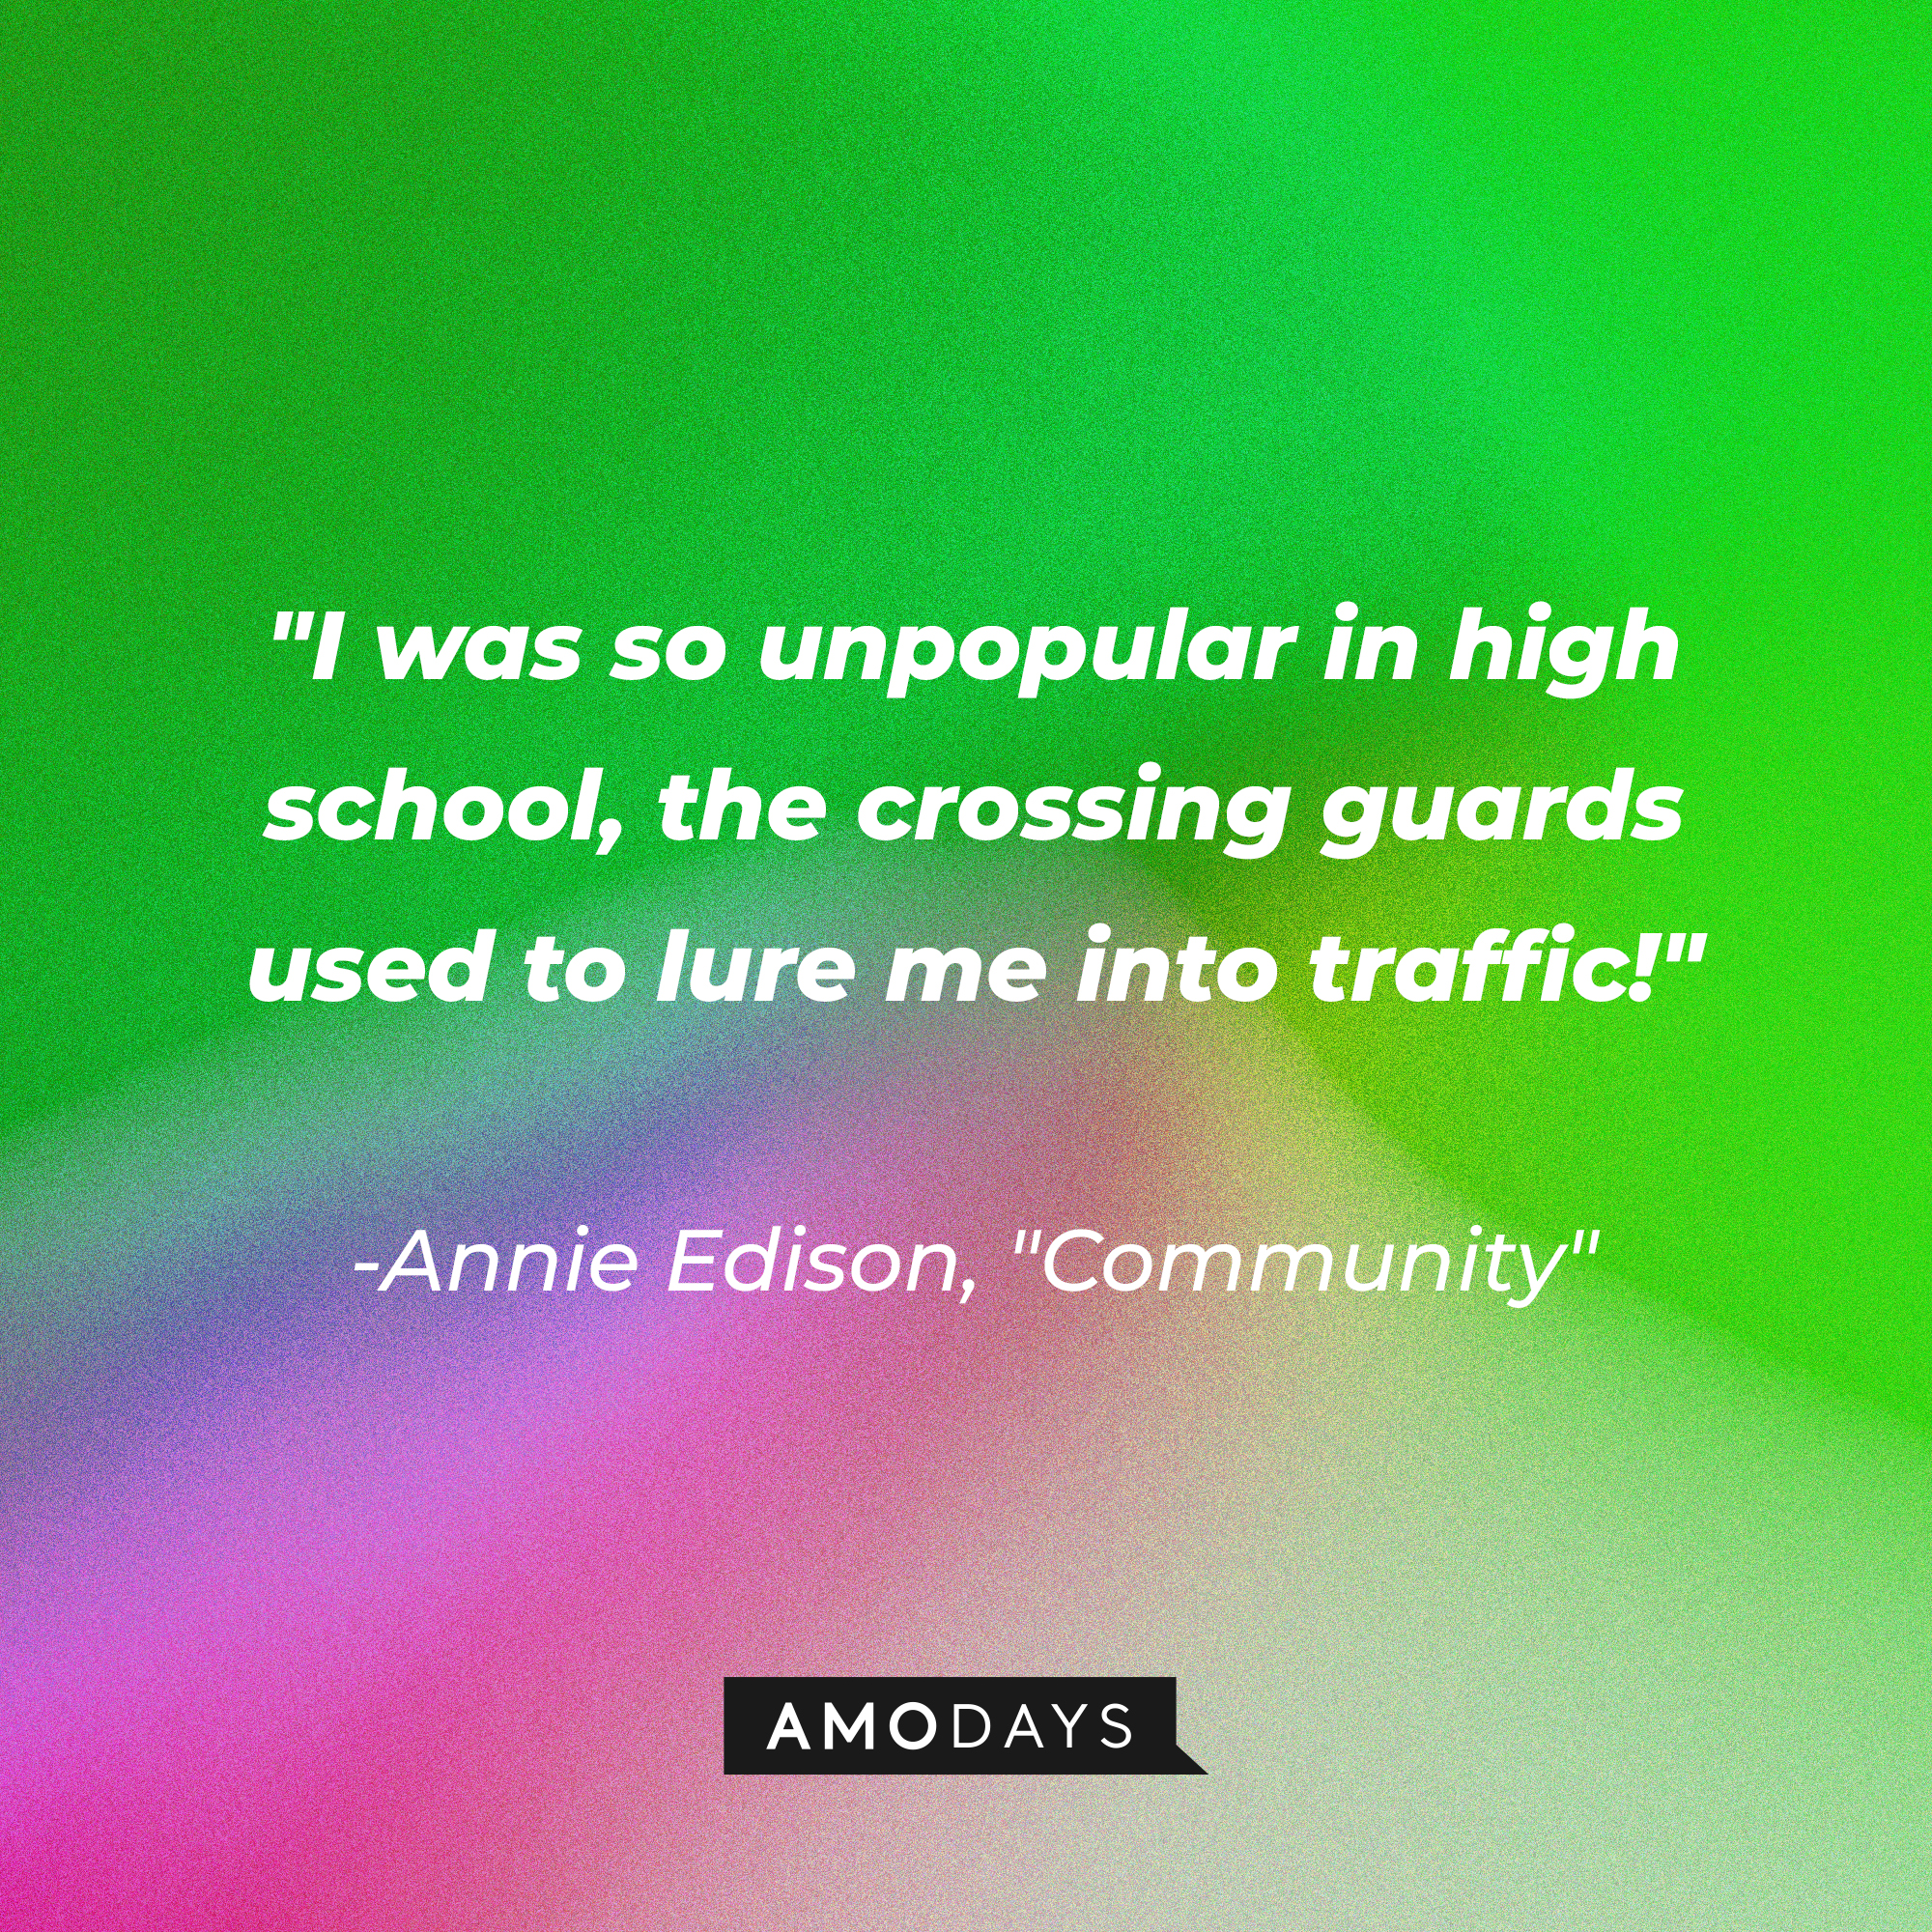 Annie Edison's quote: "I was so unpopular in high school, the crossing guards used to lure me into traffic!" | Source: Amodays